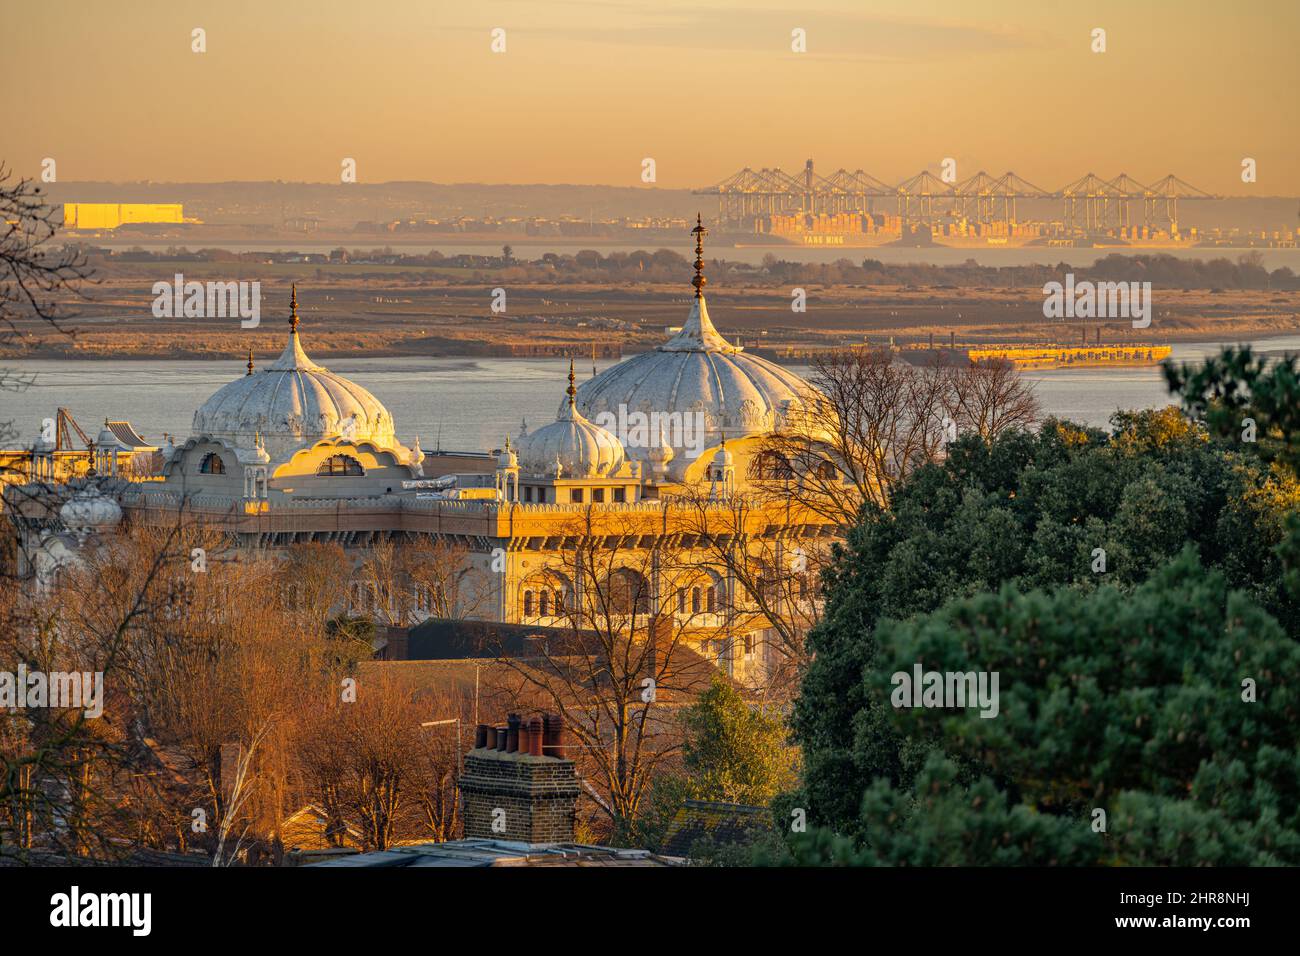 Looking towards Thames Gateway port with the domes of the  Guru Nanak Darbar Gurdwara in Gravesend in foreground at dawn Stock Photo